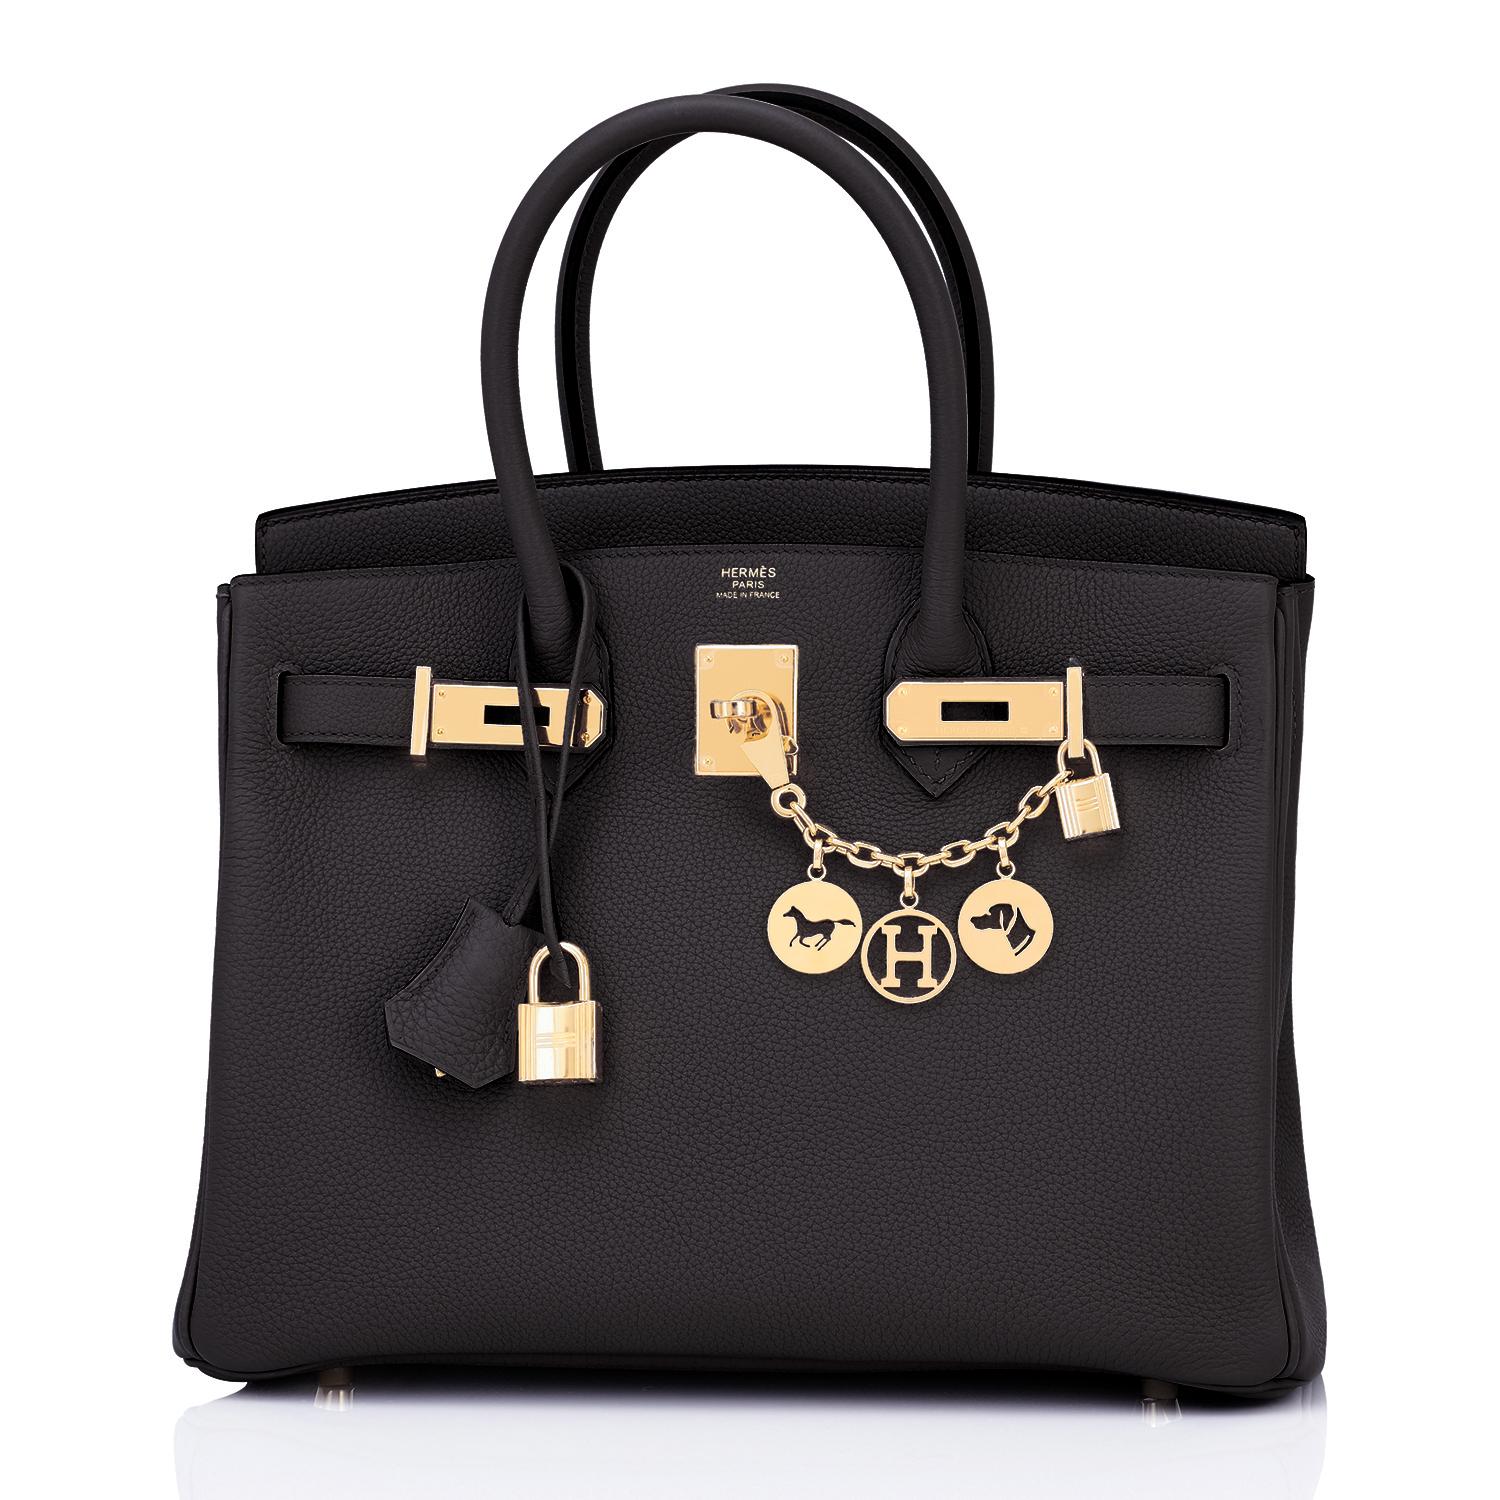 Hermes Birkin 30cm Black Togo Gold Hardware Bag Y Stamp, 2020
Brand New in Box. Store Fresh. Pristine Condition (with plastic on hardware)
Just purchased from Hermes store; bag bears new 2020 interior Y stamp! 
Perfect gift! Comes with lock, keys,